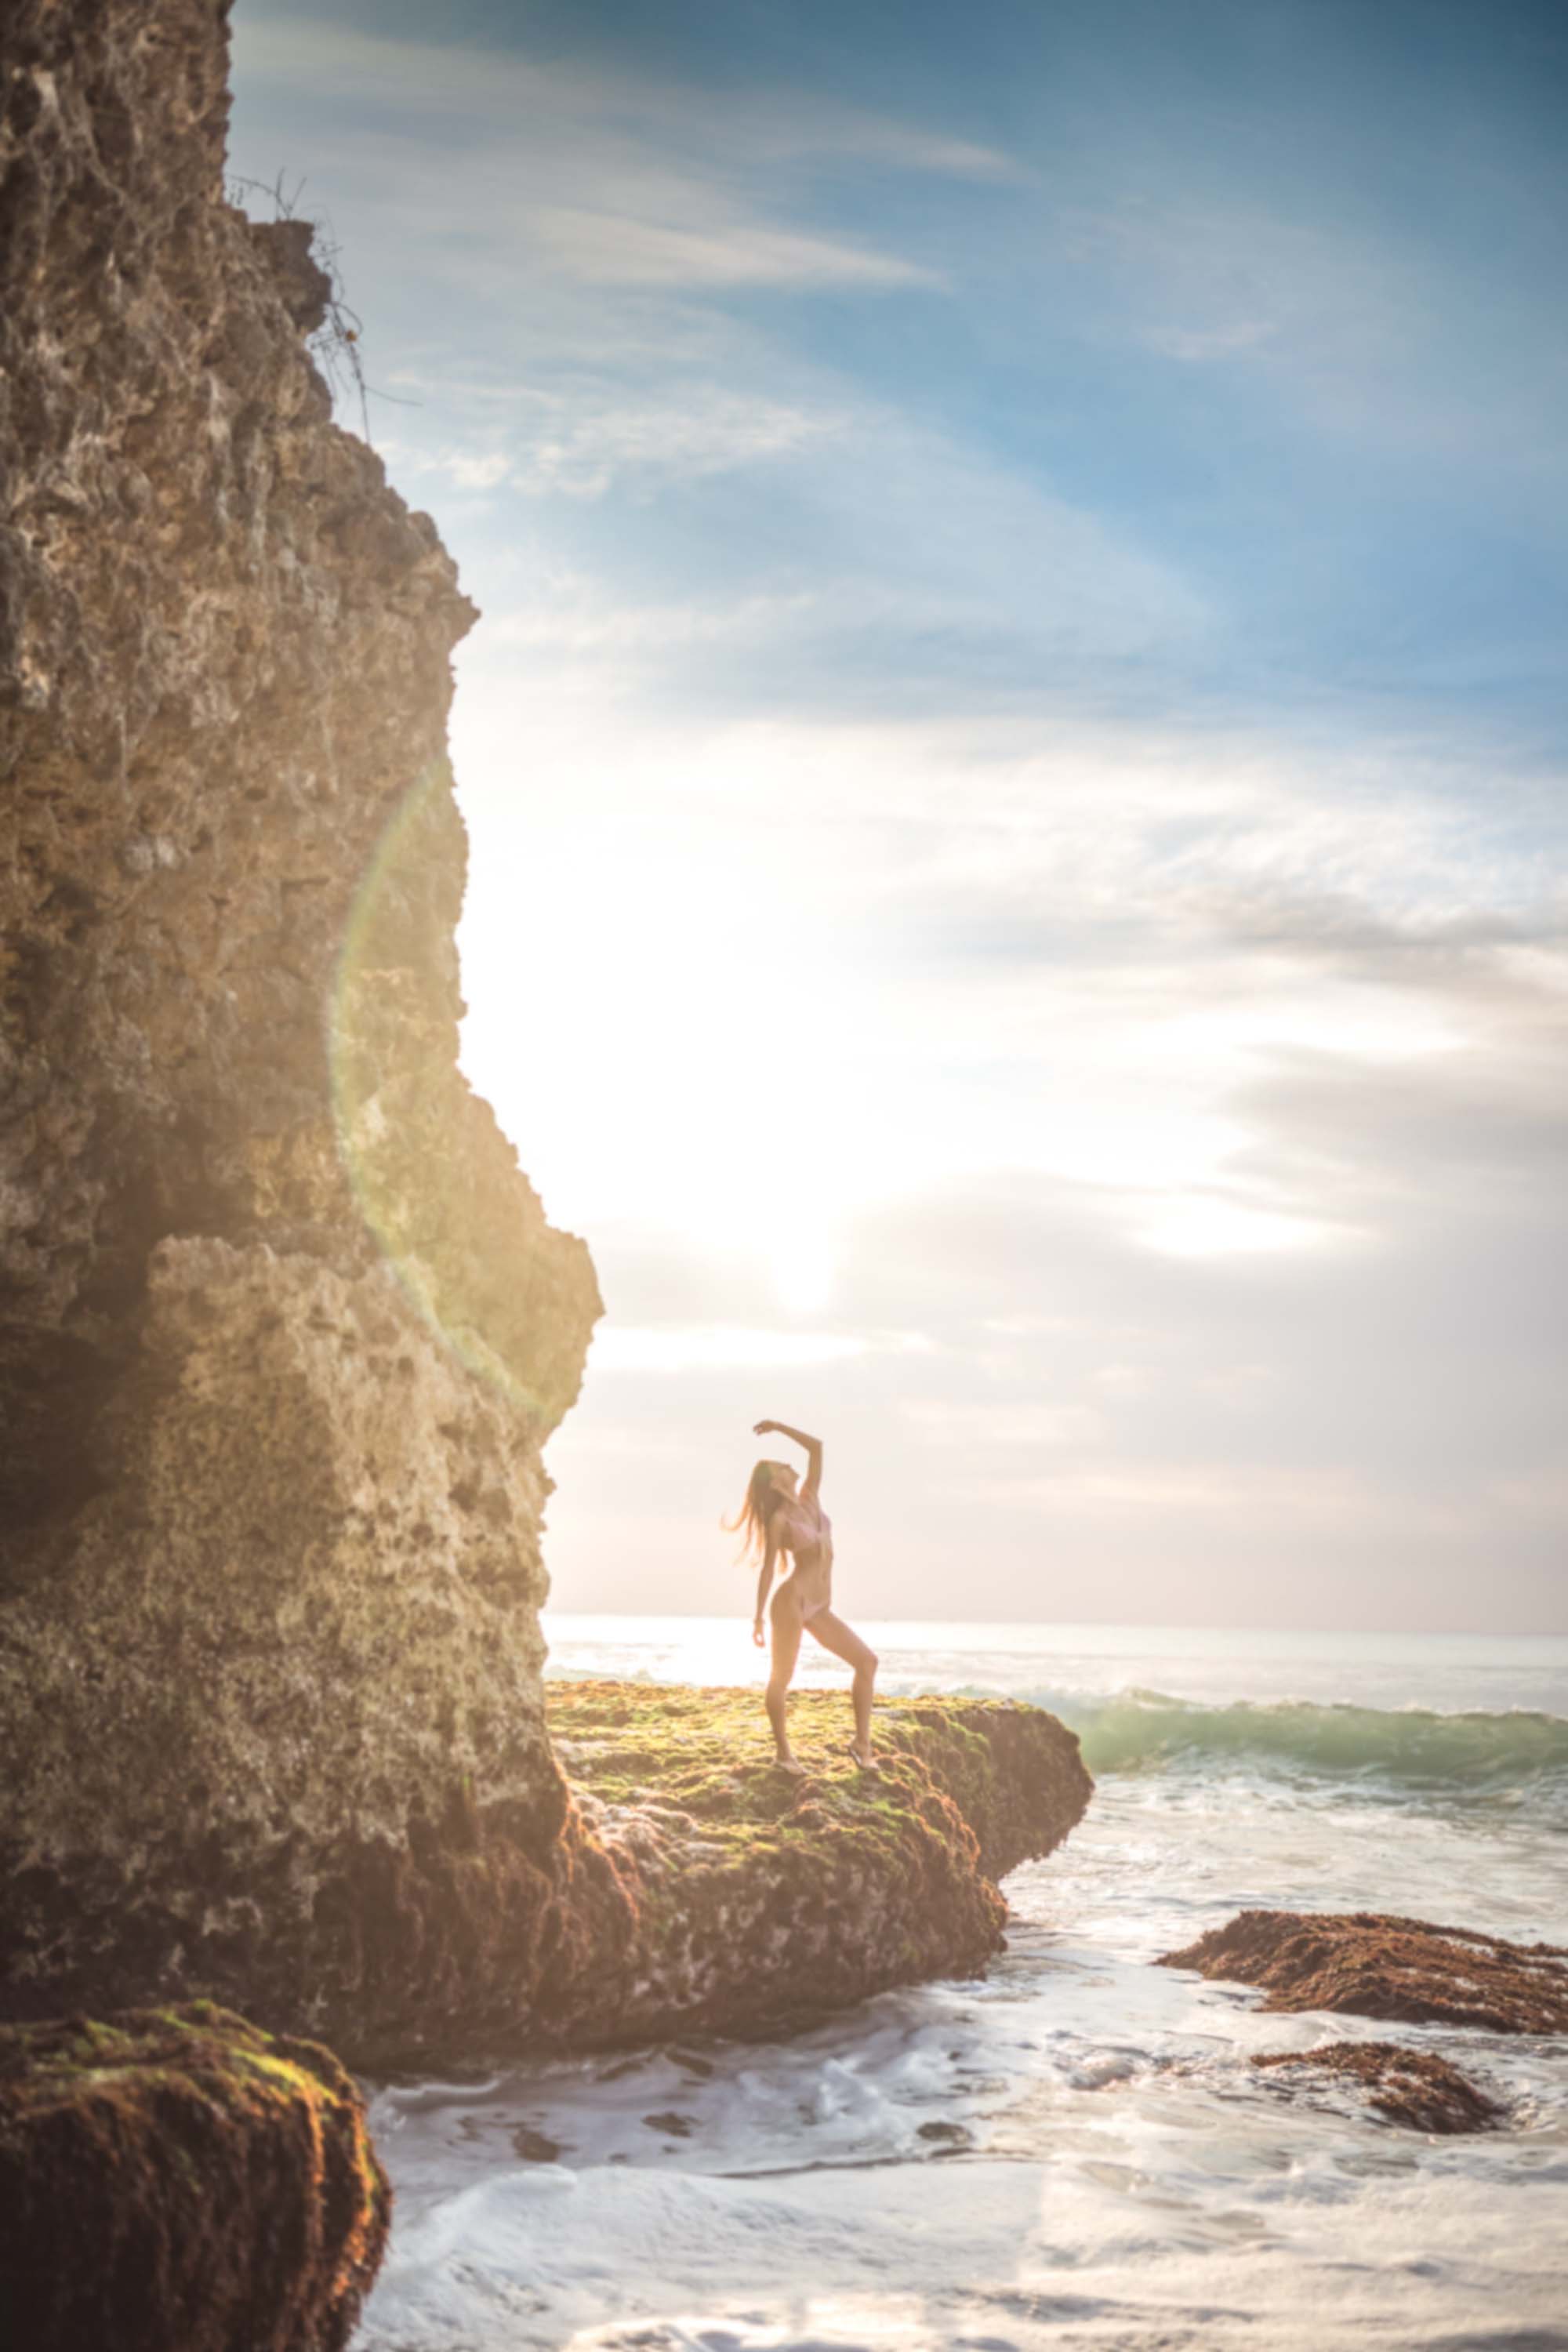 Bikini model on cliff perfect sunset with ocean in background